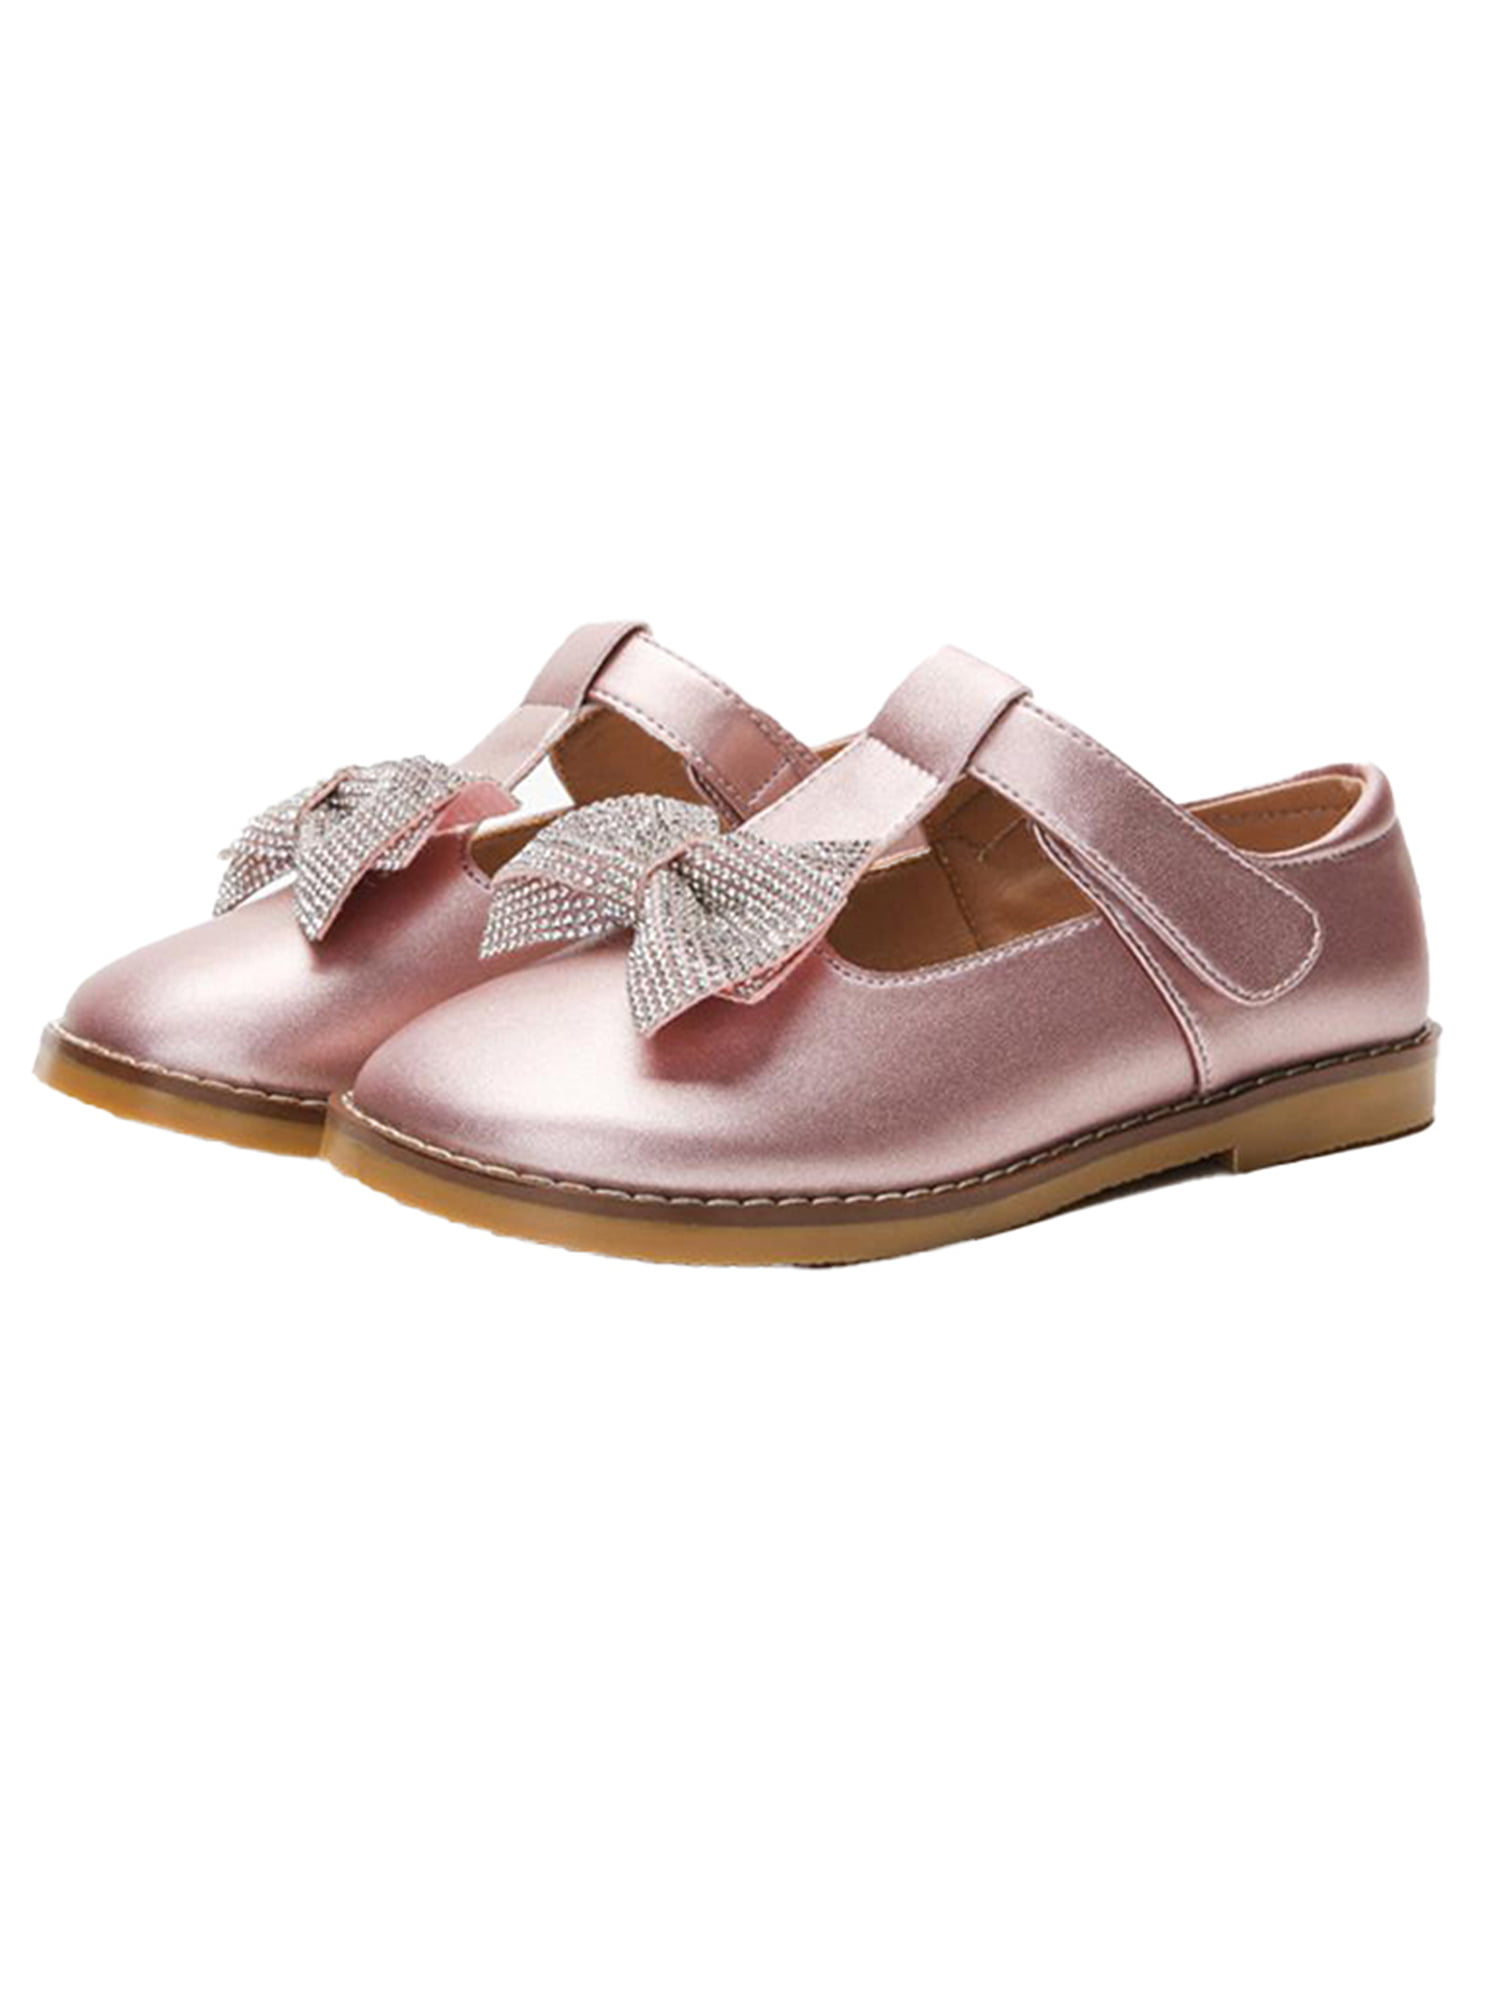 Kids Girl Sweet Square Toe Ankle Strap Flats Casual Bowknot Dance Costumes Shoes